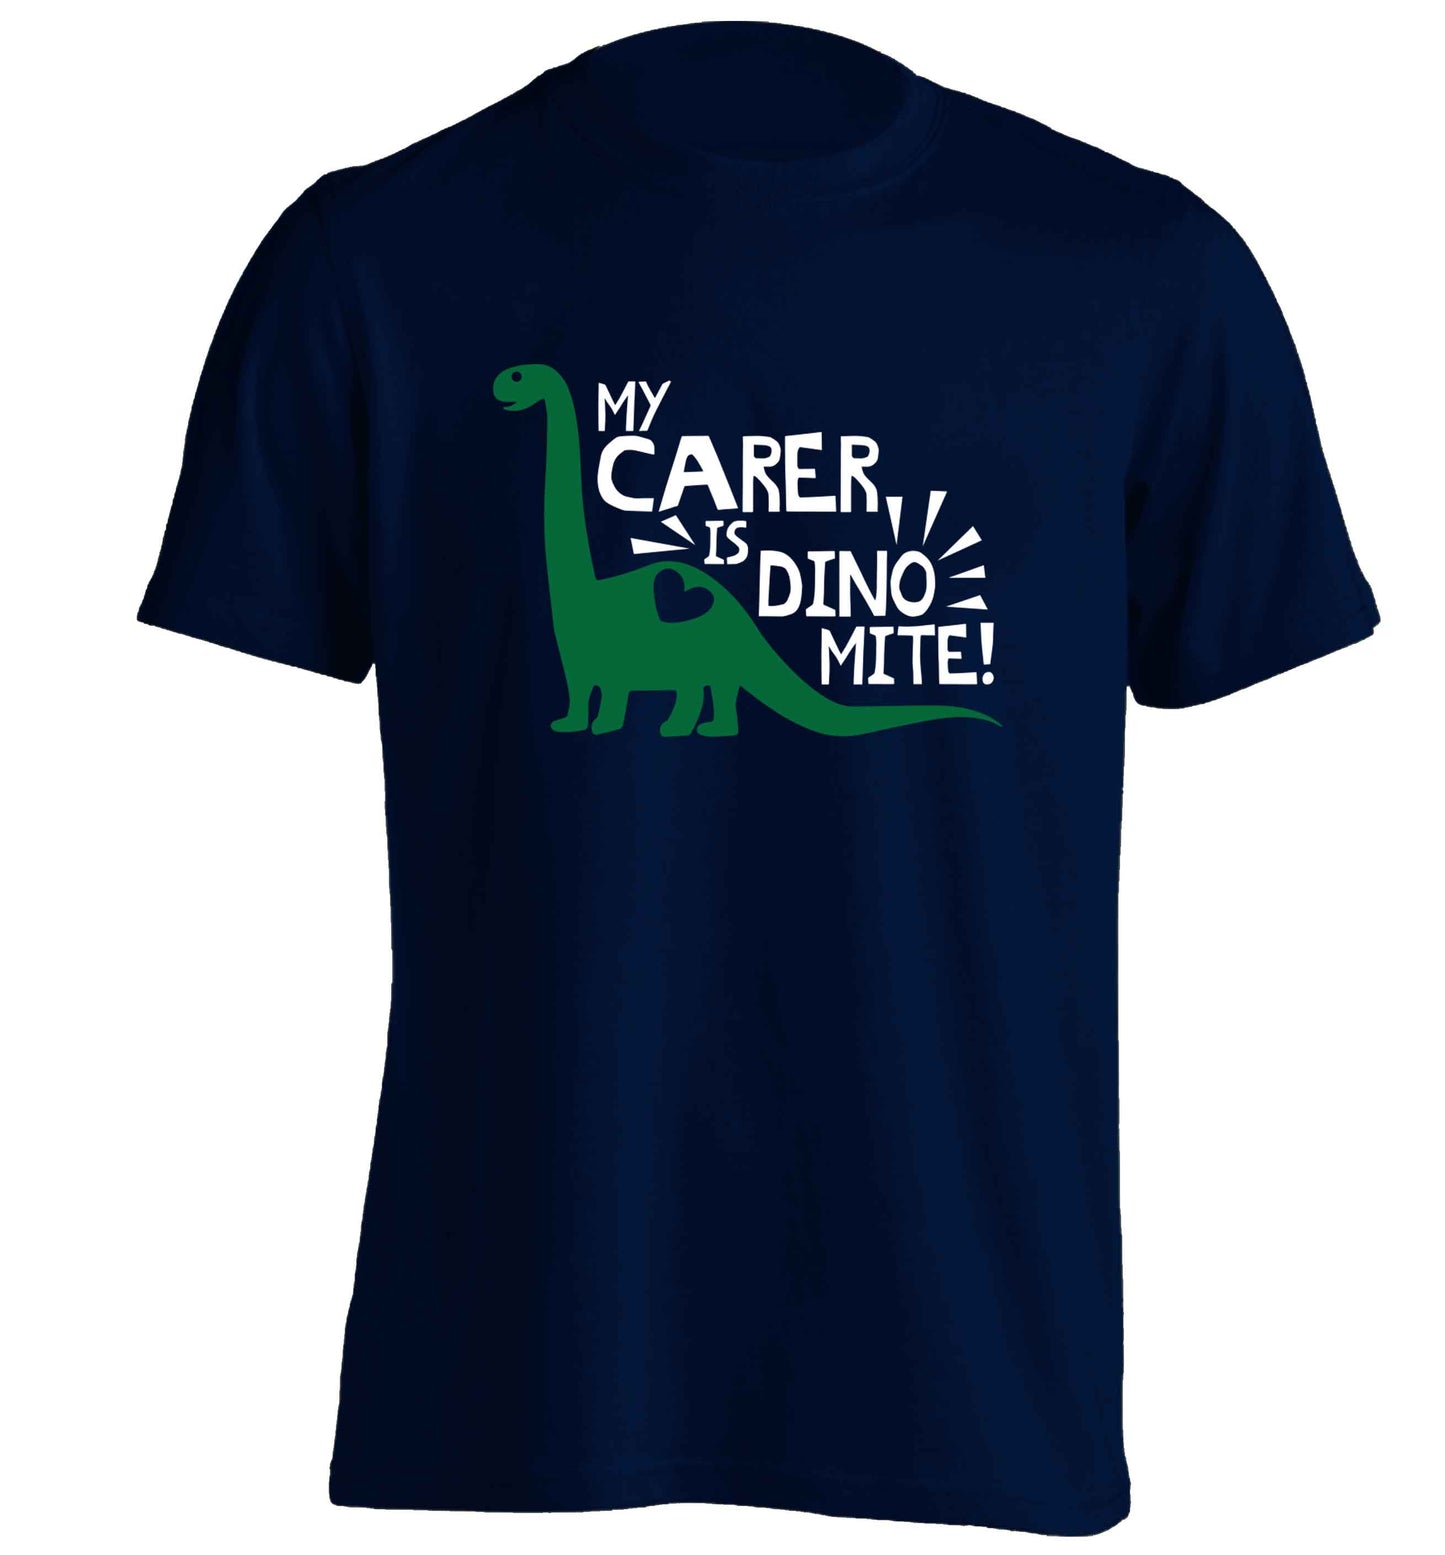 My carer is dinomite! adults unisex navy Tshirt 2XL